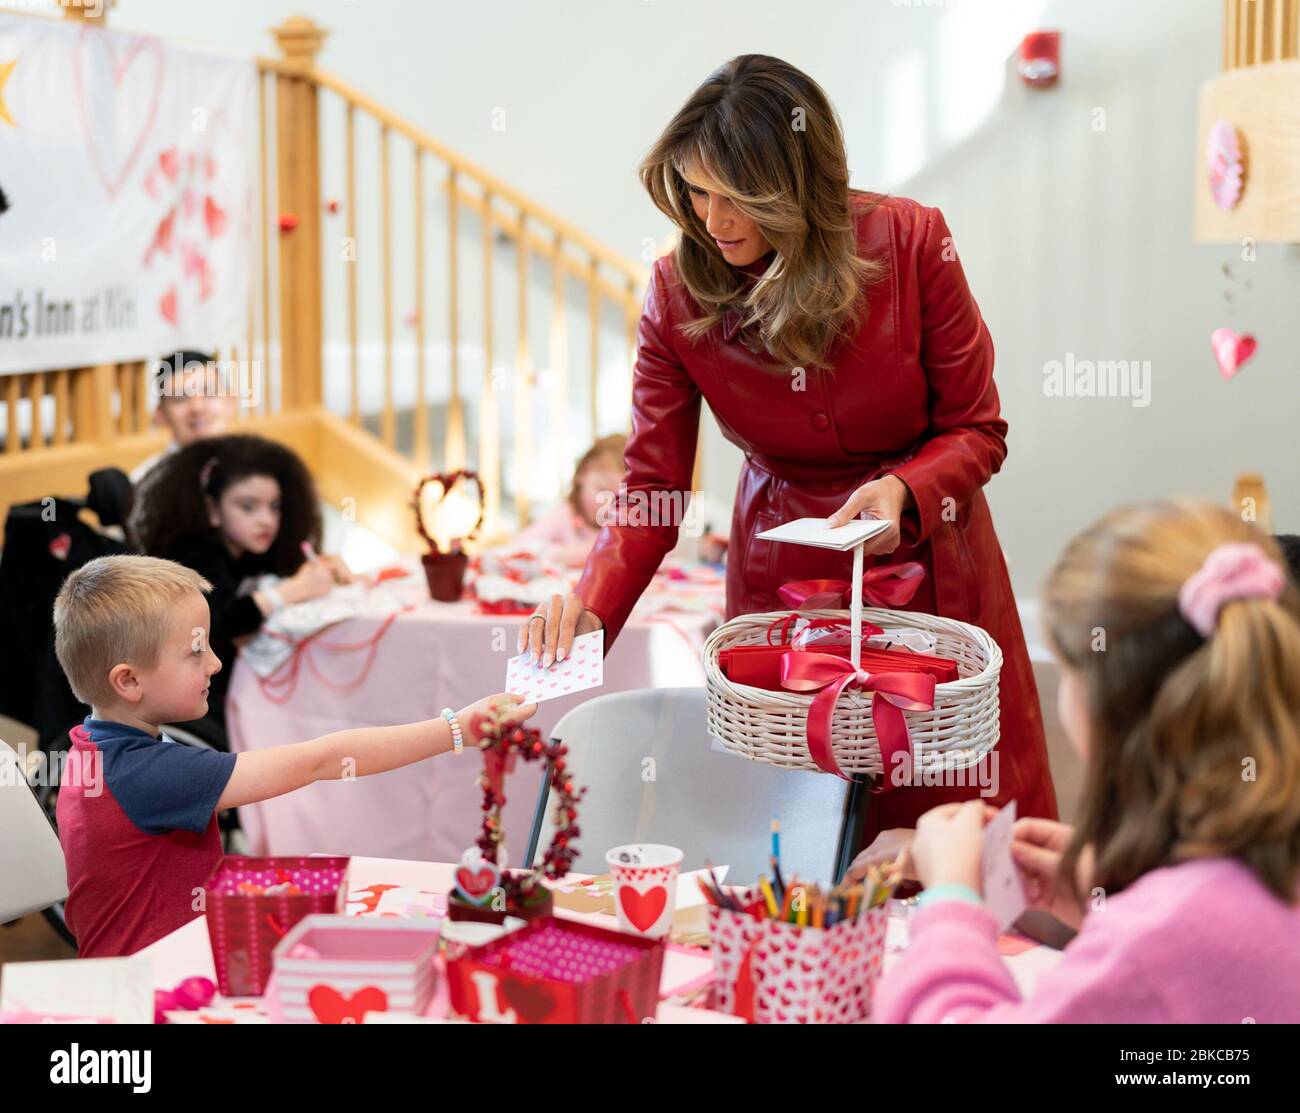 First Lady Melania Trump receives a valentine card from 7 year-old patient Hunter Chaplin of Dinwiddie, Va. during a Valentine’s Day visit Friday, Feb. 14, 2020, at the Children’s Inn at the National institute of Health in Bethesda, Md. First Lady Melania Trump Visits the Children’s Inn at the National Institute of Health Stock Photo